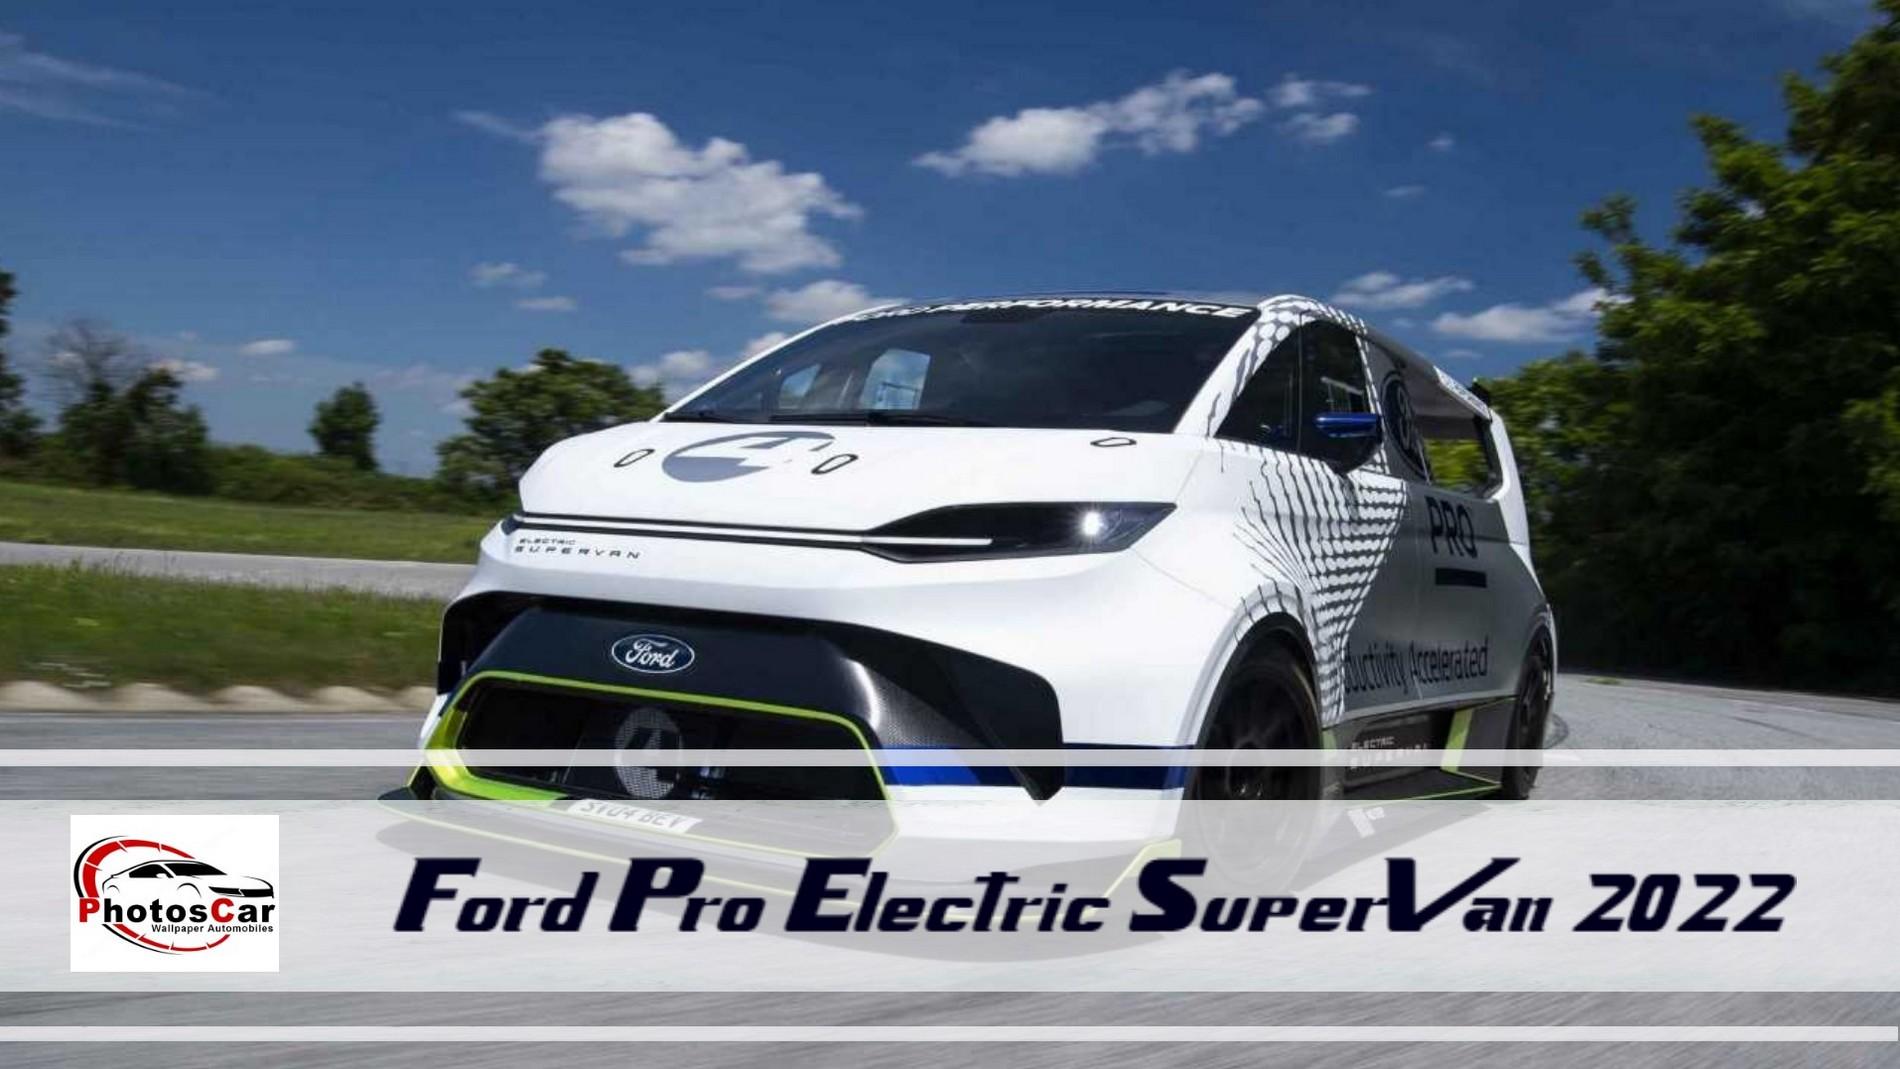 Ford Pro Electric SuperVan 2022